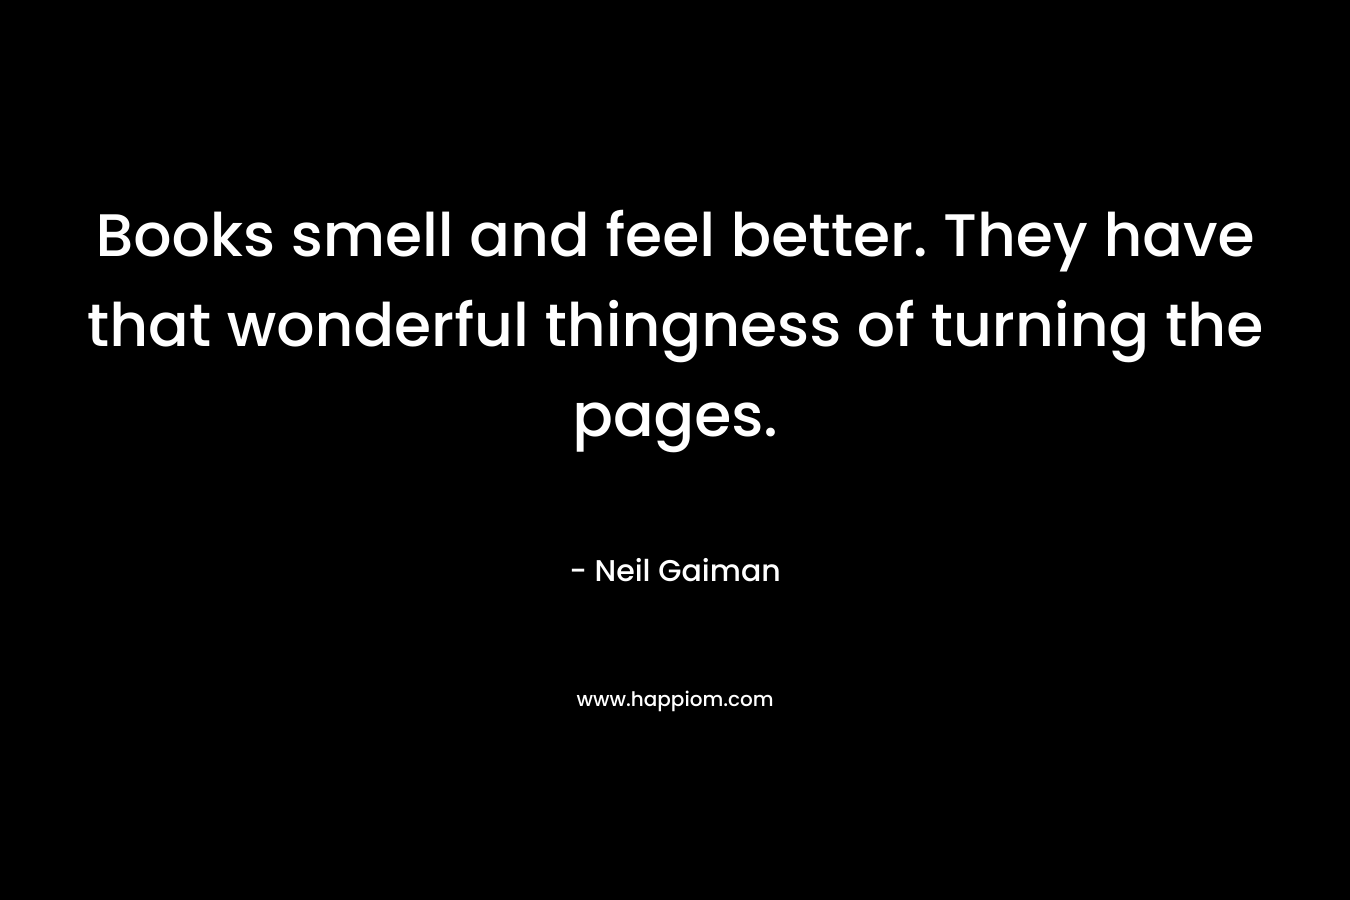 Books smell and feel better. They have that wonderful thingness of turning the pages.